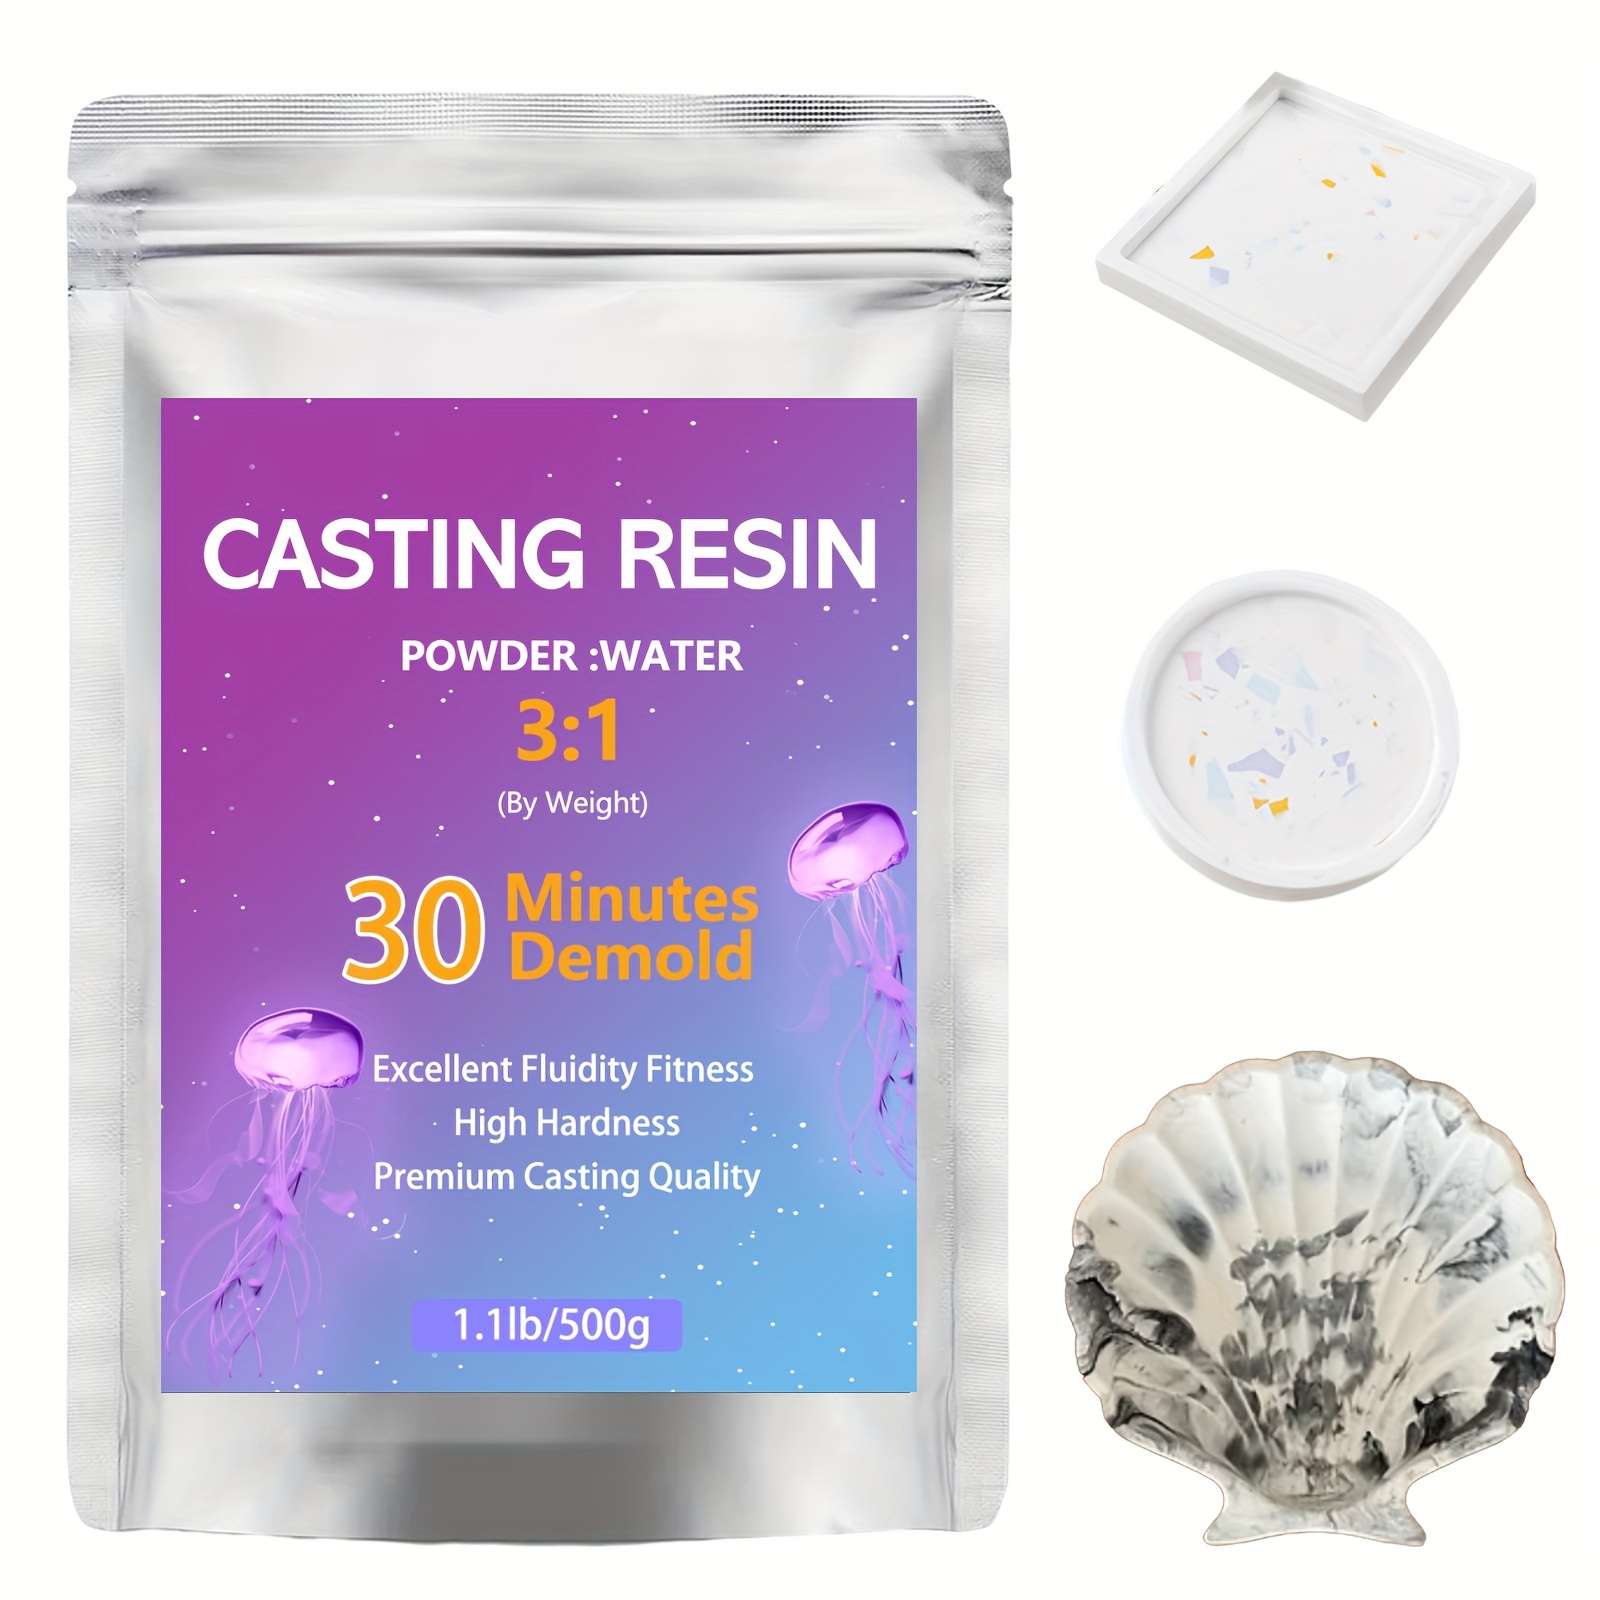 

Casting Resin Powder Plaster 500g - 3:1 Water Ratio, 30 Minutes Demold, High Hardness, Premium Casting Quality For Stunning Stone Aesthetics And Intricate Textures - Ideal For Modeling Compounds